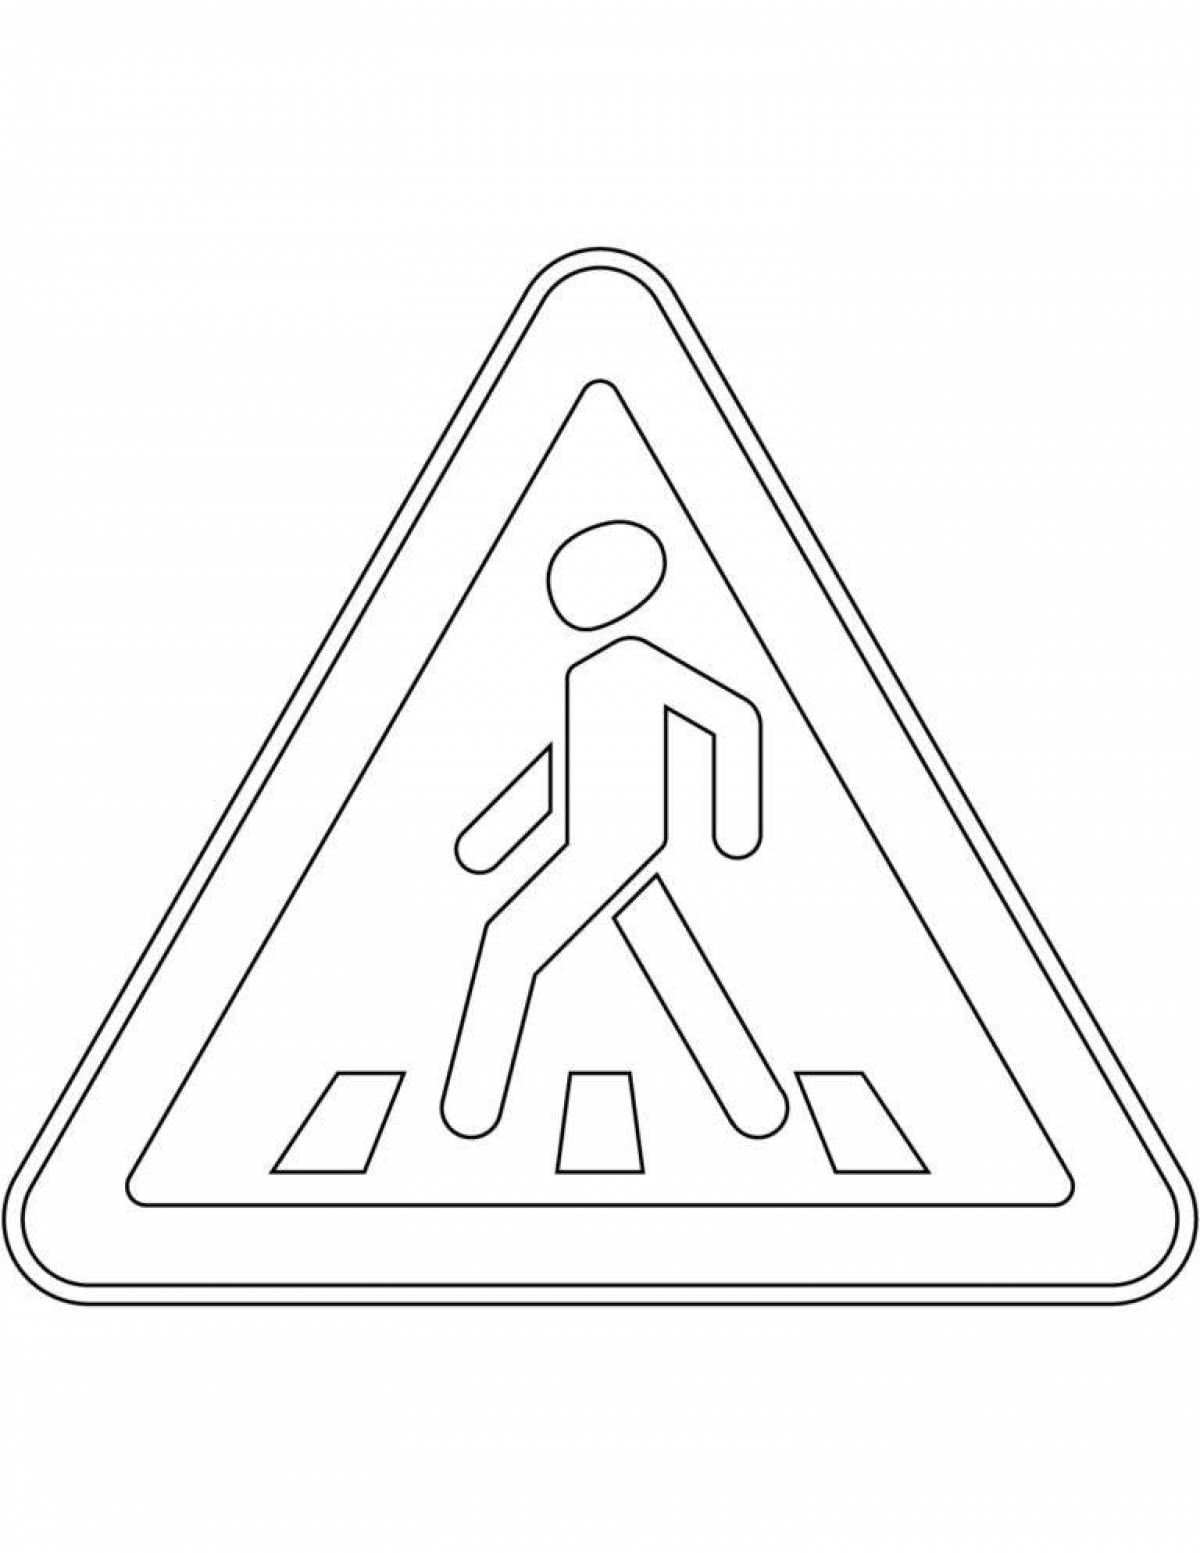 Creative traffic signs coloring page